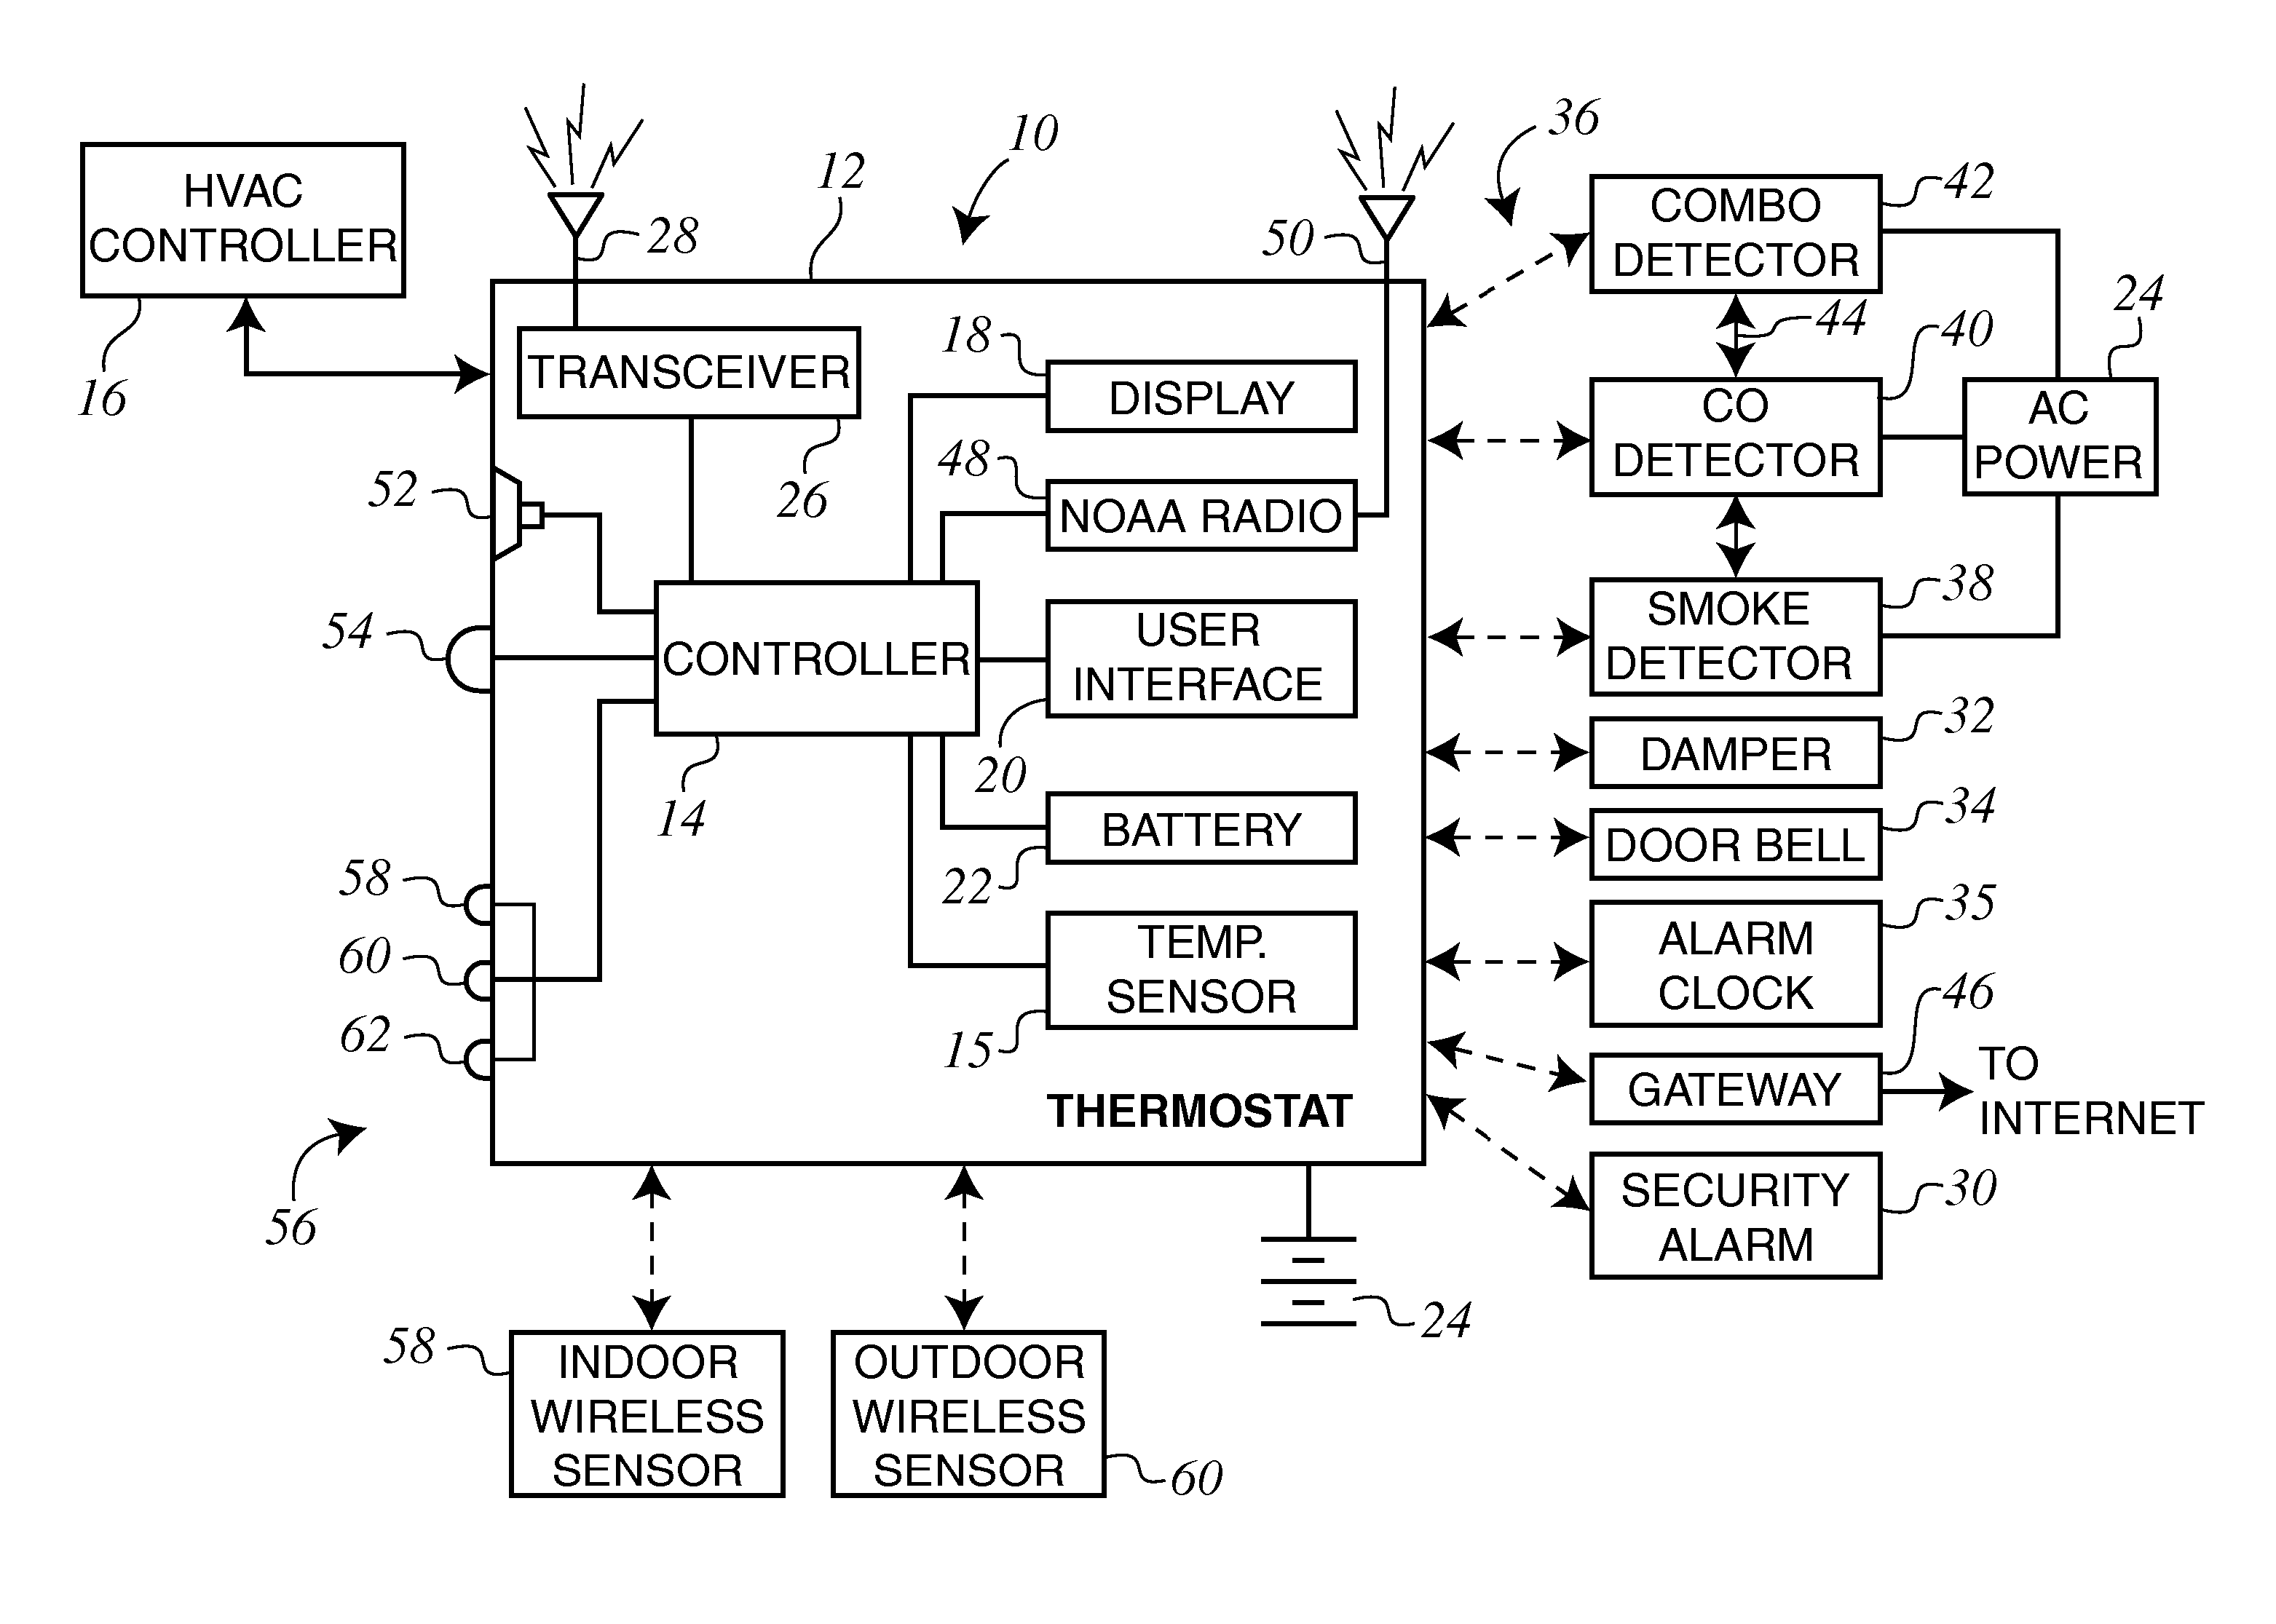 Combination thermostat and warning device with remote sensor monitoring